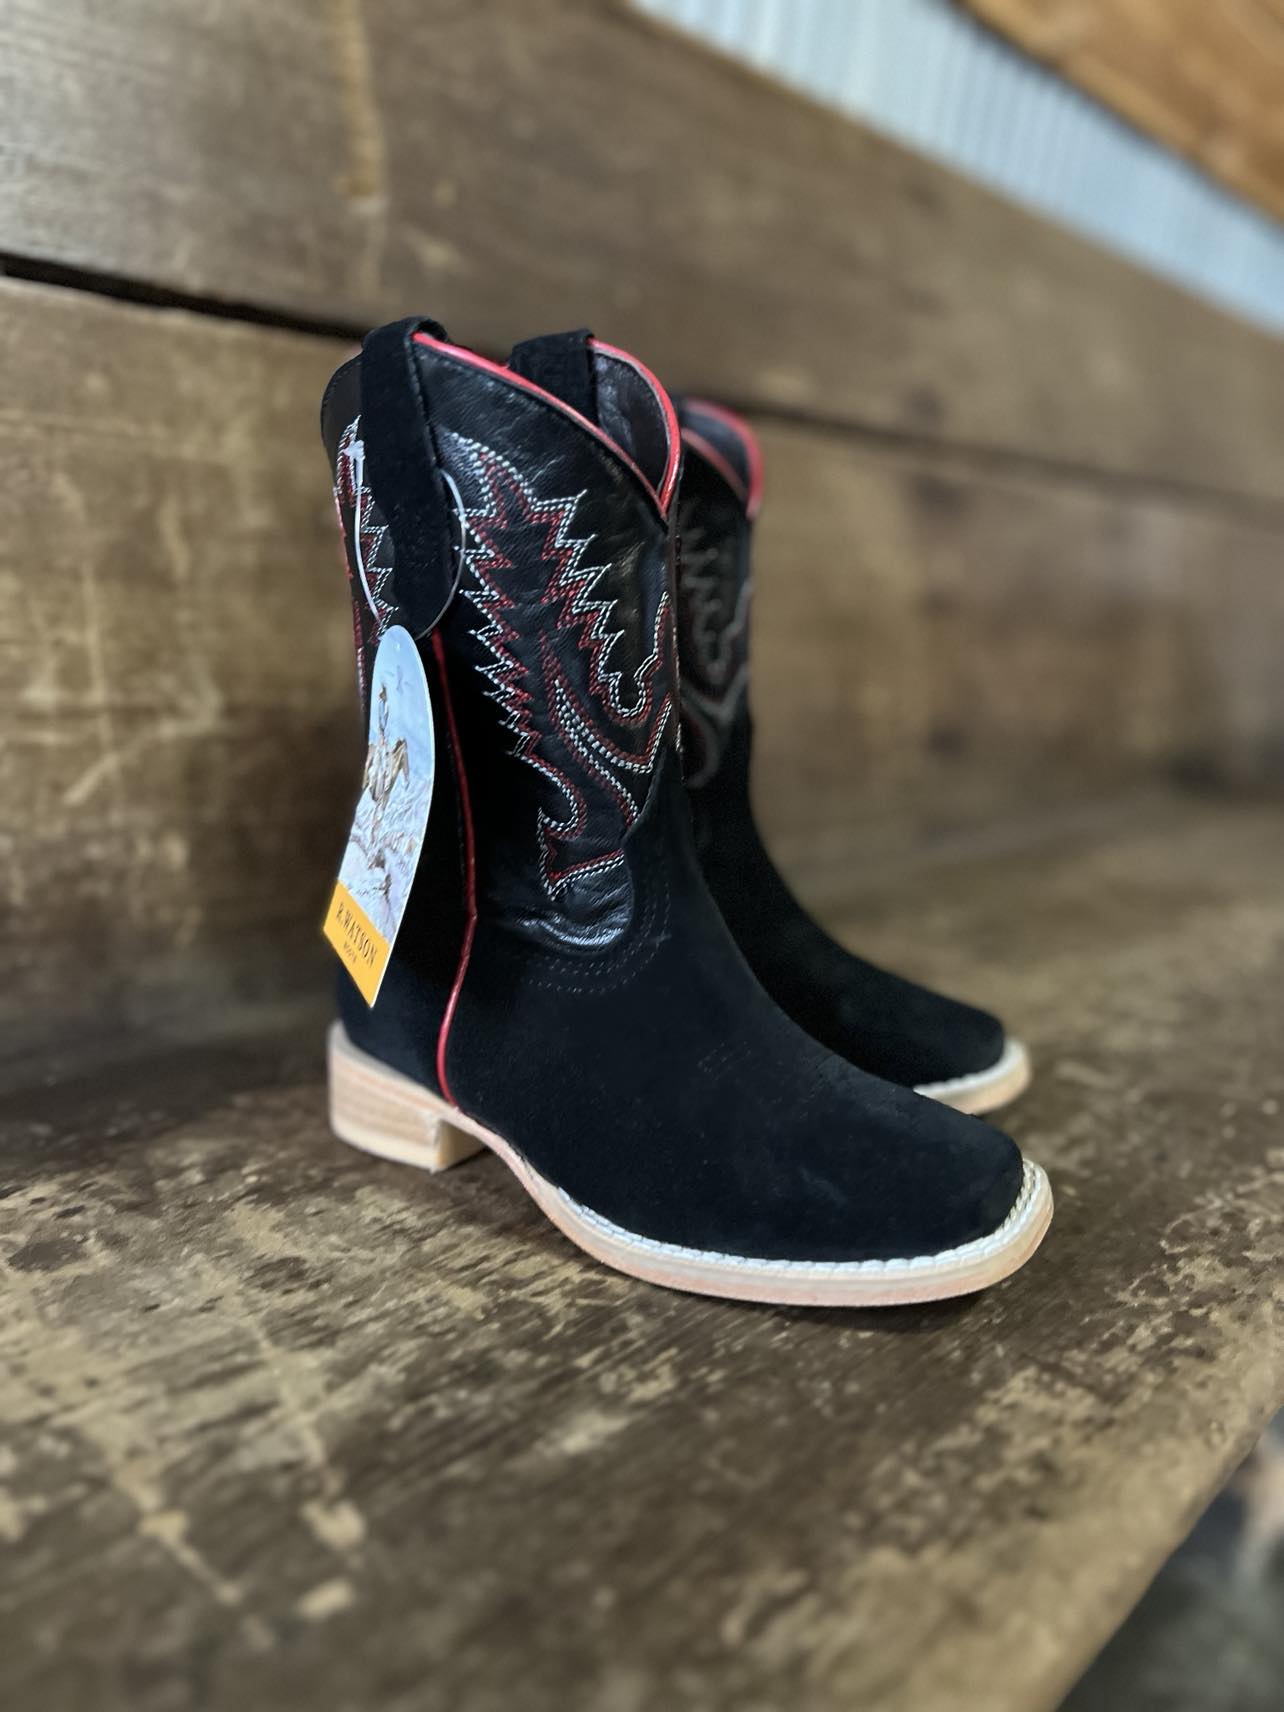 R Watson Kids Black Rough Out/ Black Cowhide-Kids Boots-R. Watson-Lucky J Boots & More, Women's, Men's, & Kids Western Store Located in Carthage, MO